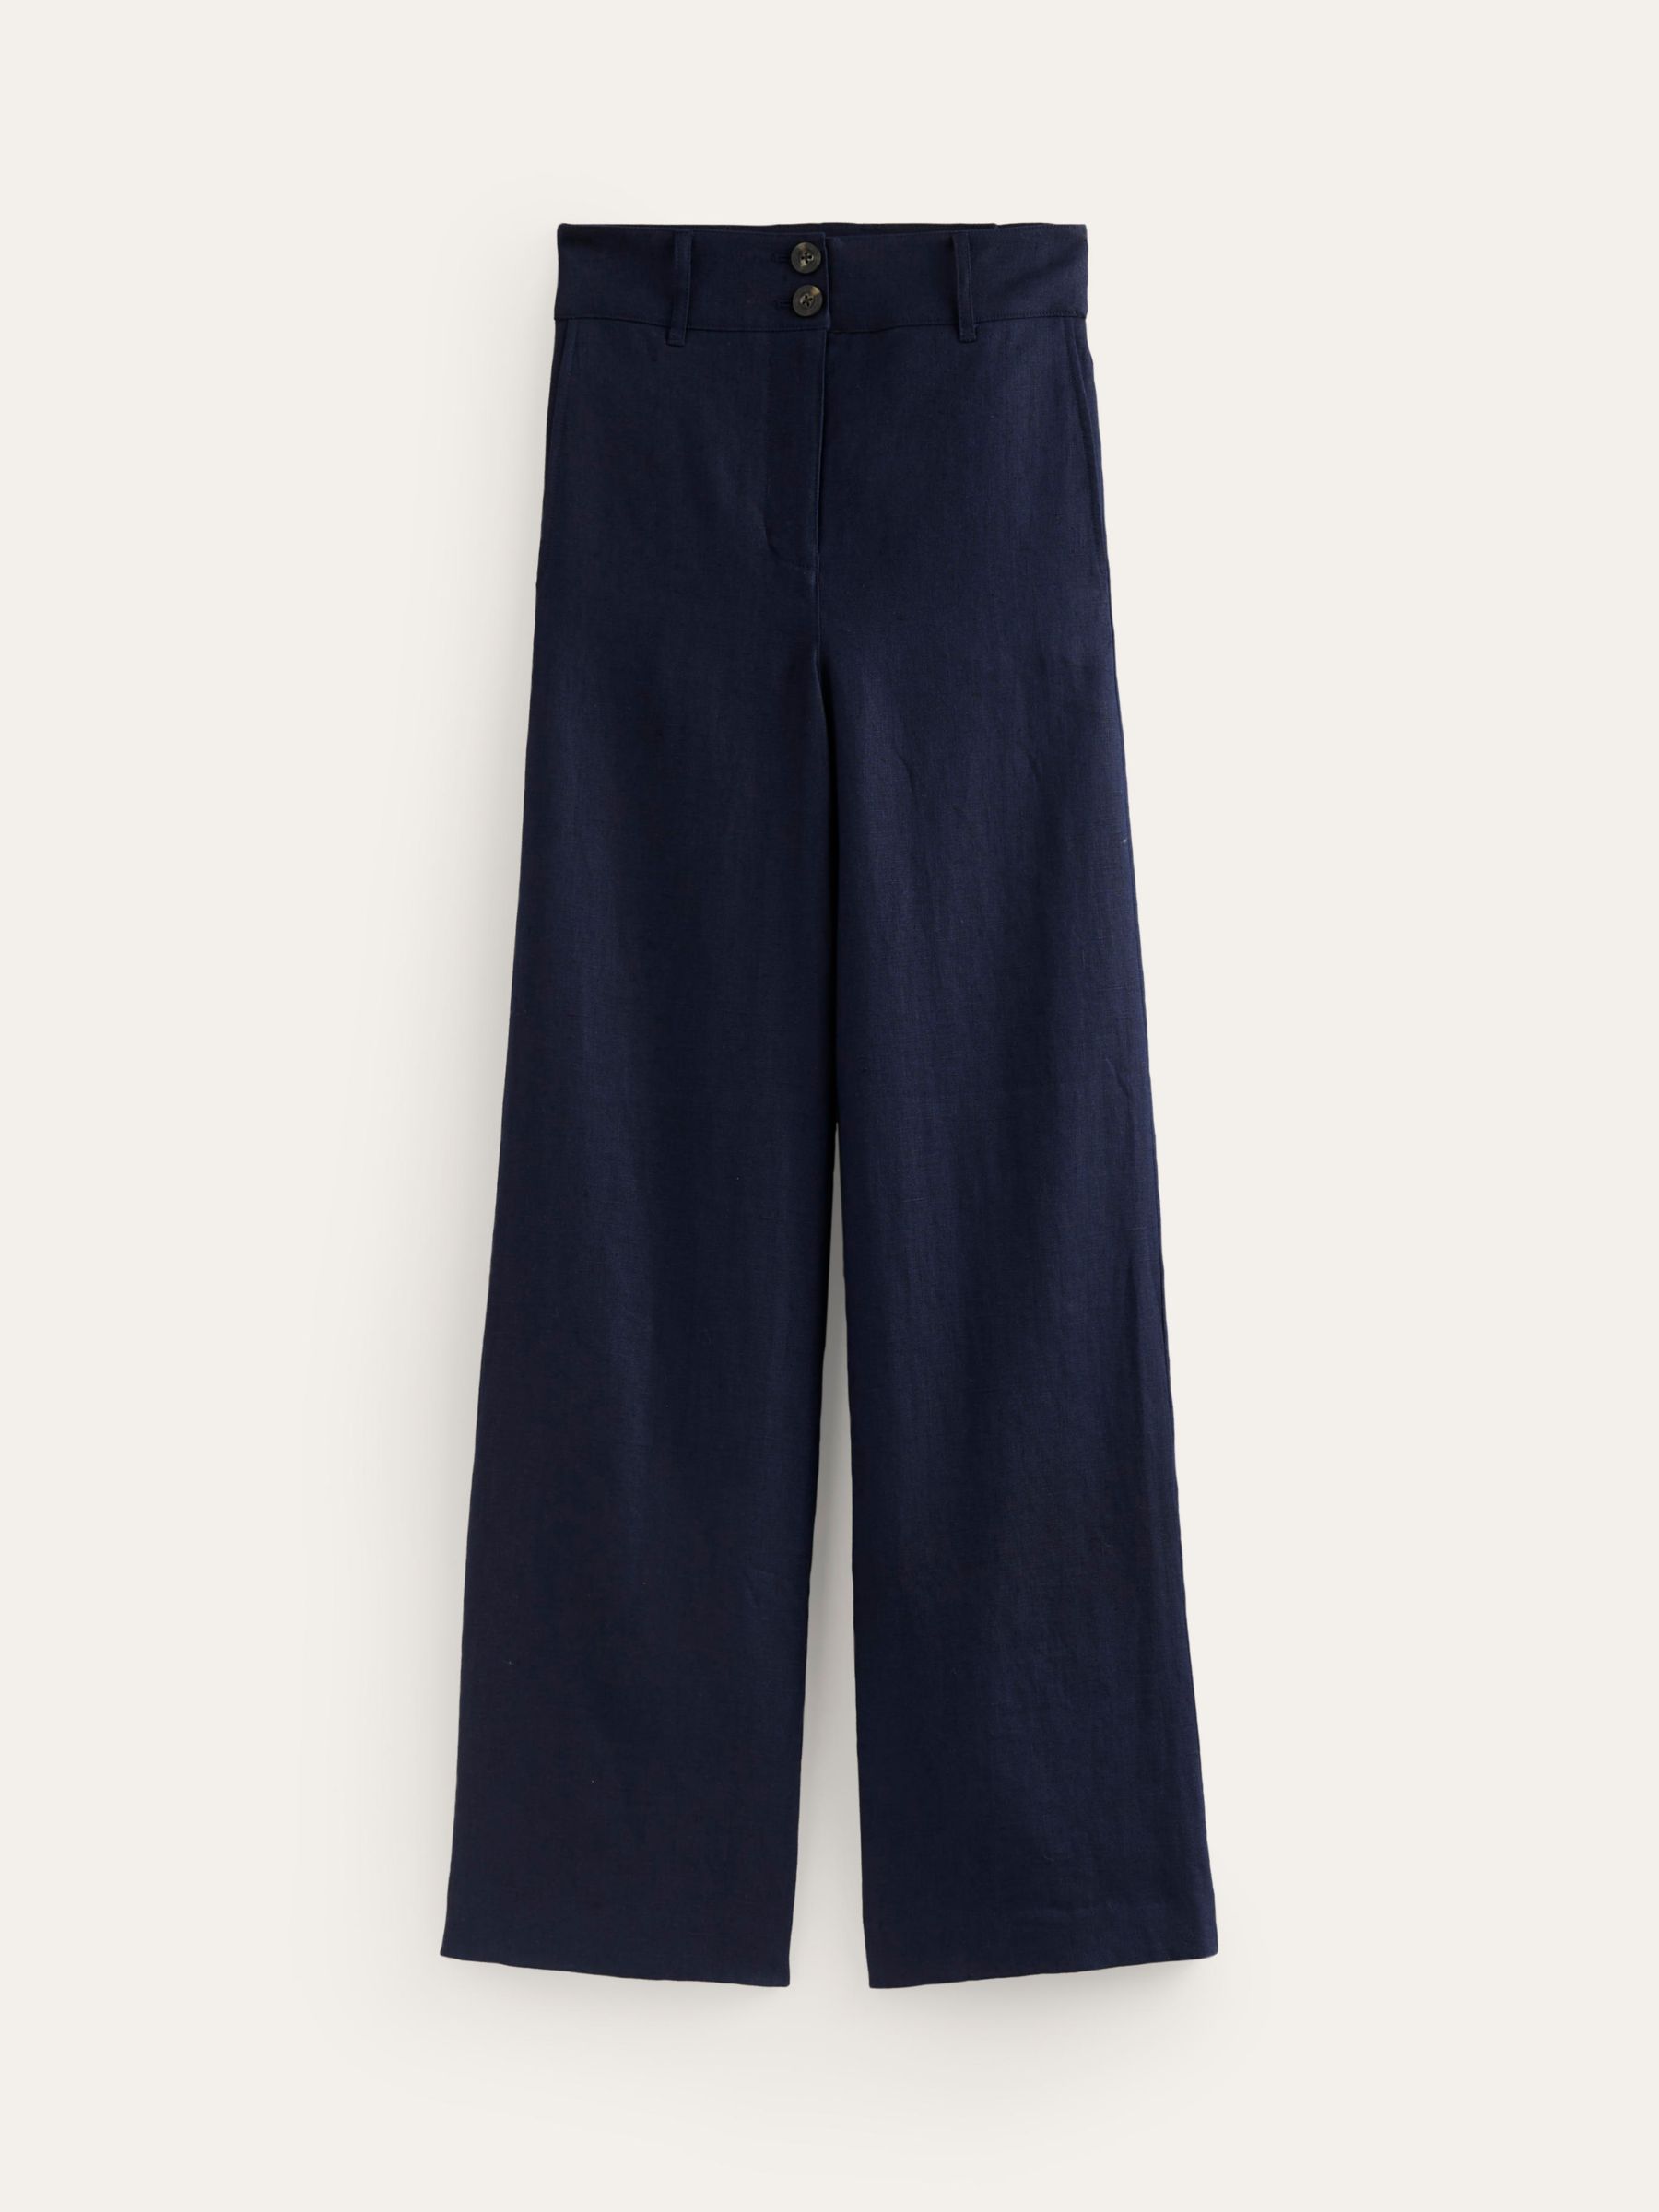 Buy Boden Westbourne Wide Leg Linen Trousers Online at johnlewis.com